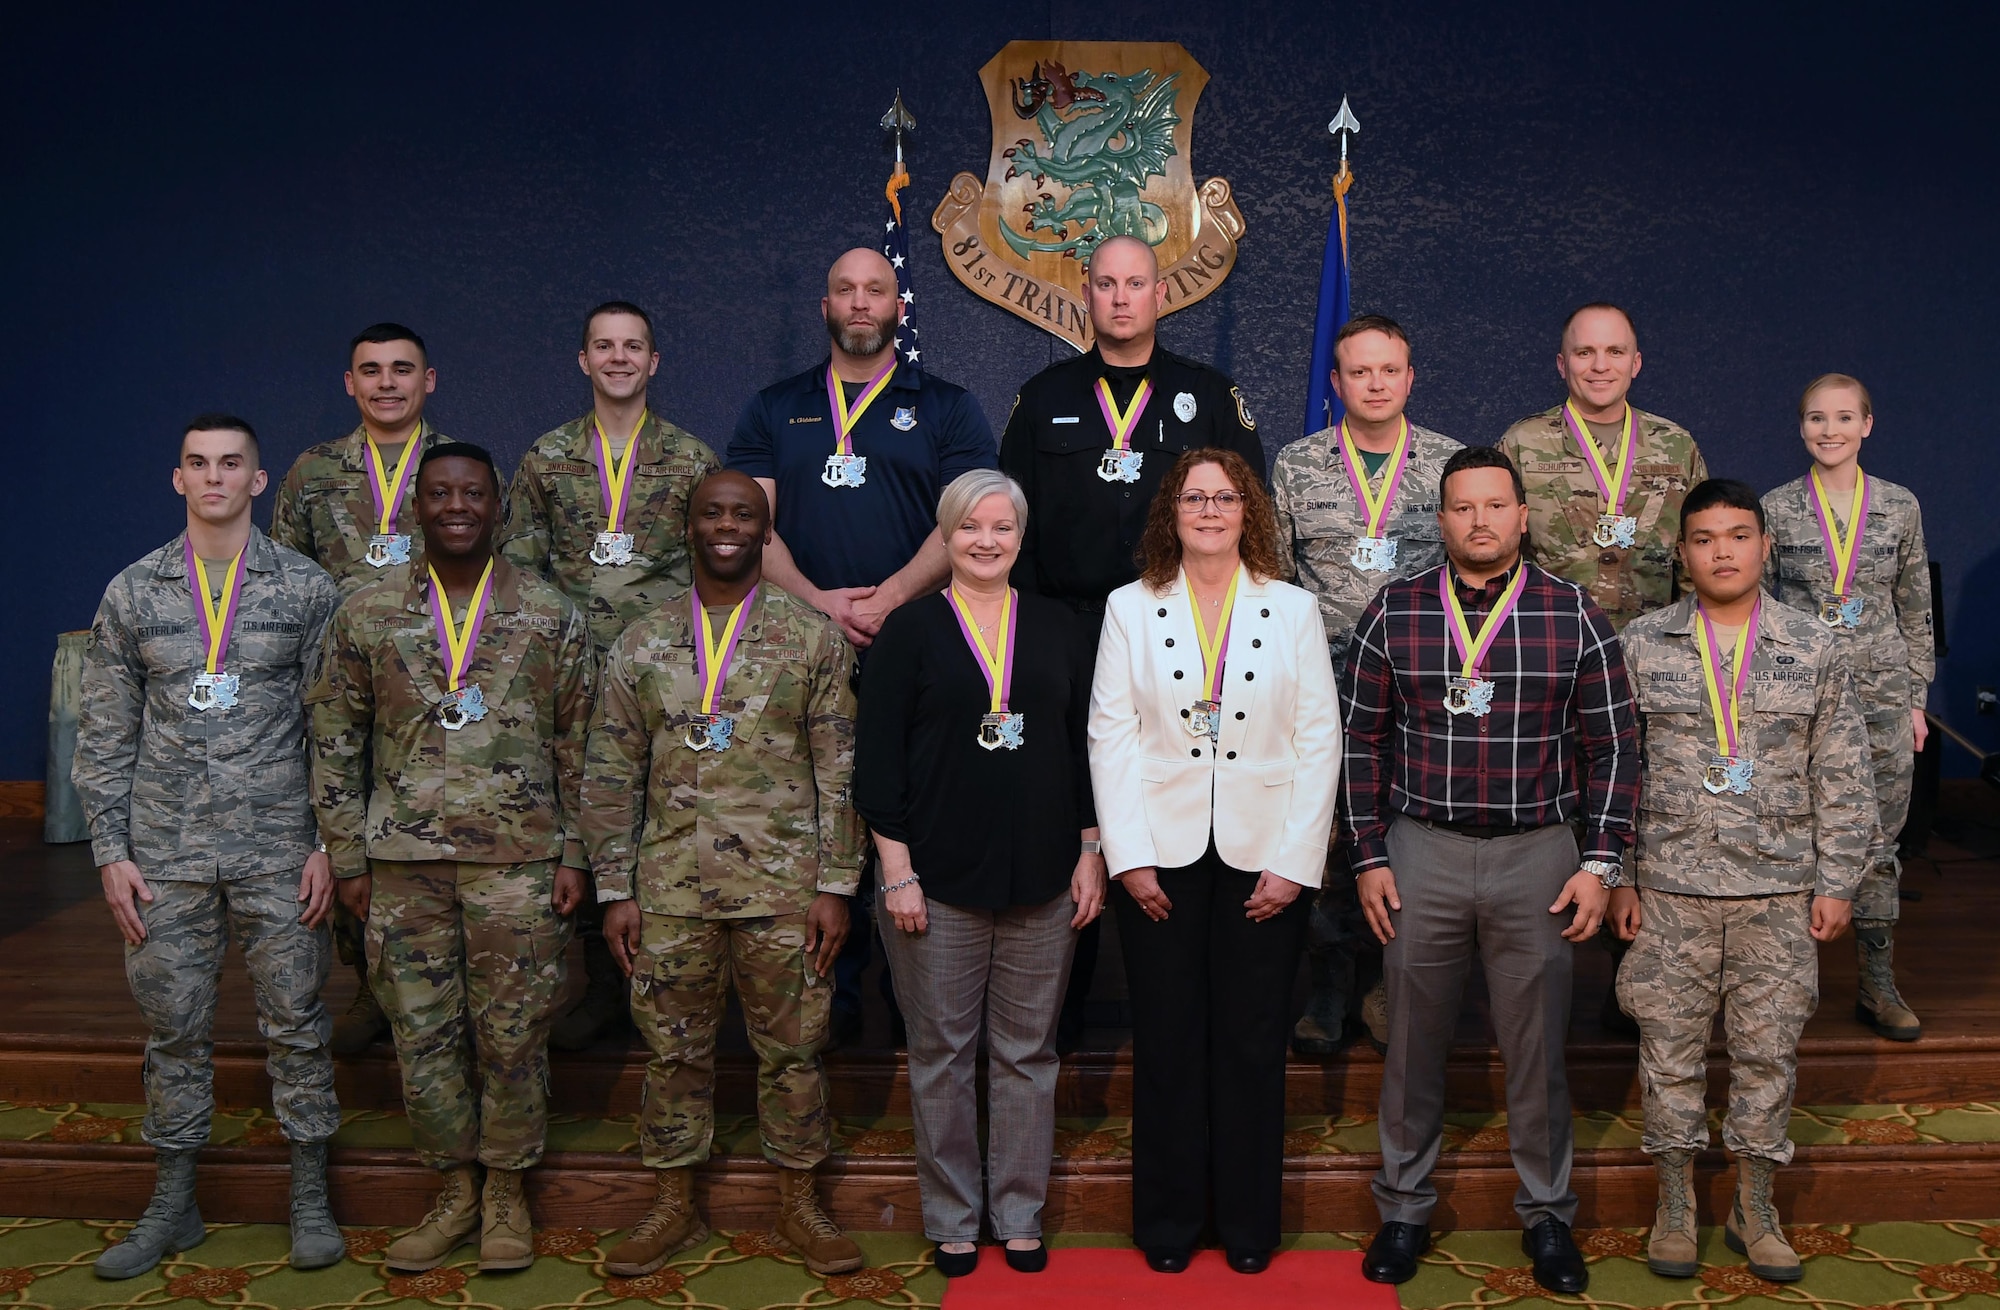 Winners of the 81st Training Wing's 2019 Annual Awards Ceremony pose for a photo inside the Bay Breeze Event Center at Keesler Air Force Base, Mississippi, Feb. 14, 2020. During the ceremony, base leadership recognized outstanding Airmen and civilians from across the installation for their accomplishments throughout 2019. (U.S. Air Force photo by Kemberly Groue)